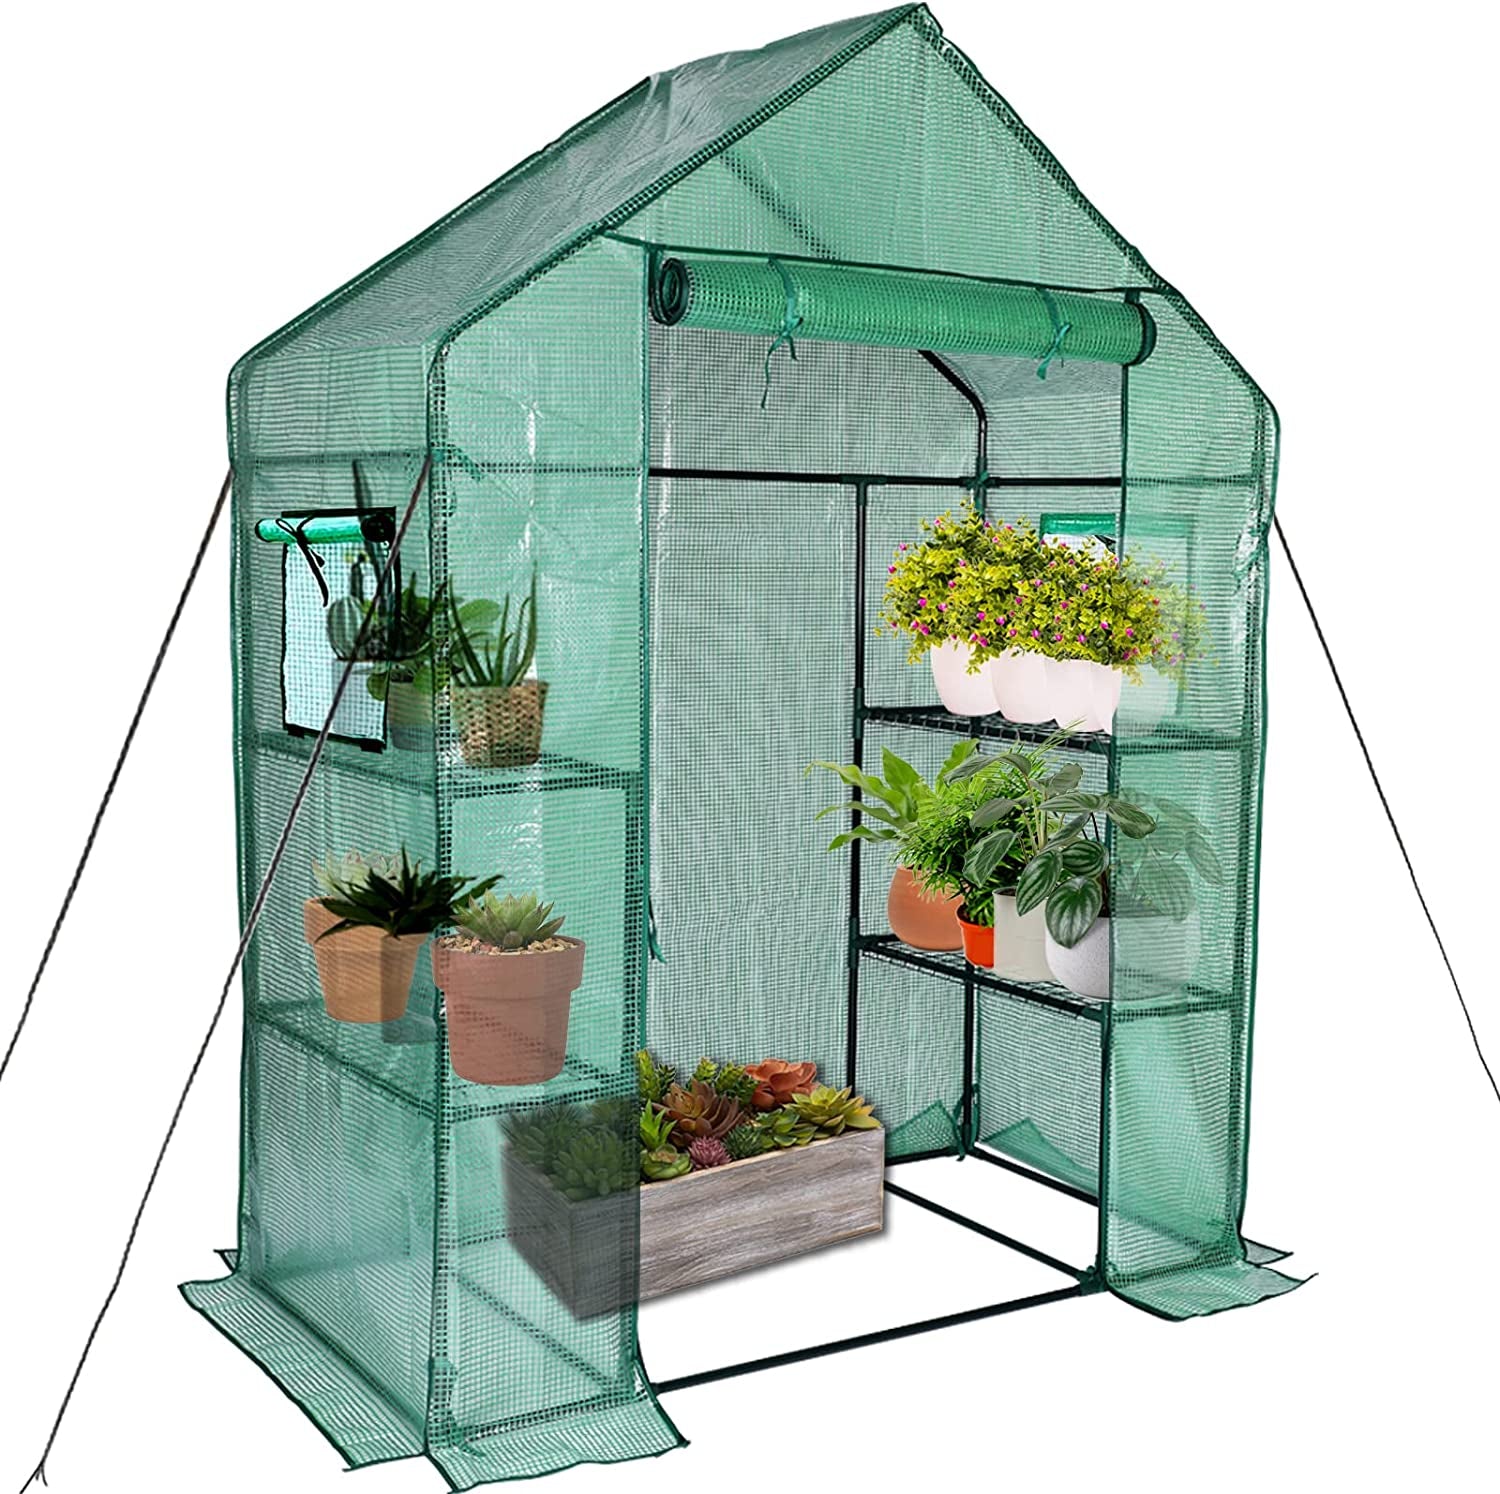 KOKSRY, KOKSRY Mini Greenhouse,Greenhouses for Outdoors,Portable Walk in Green House for Garden Plants That Need Frost Protection and Away from Pests, Animals(56"X30"X76")